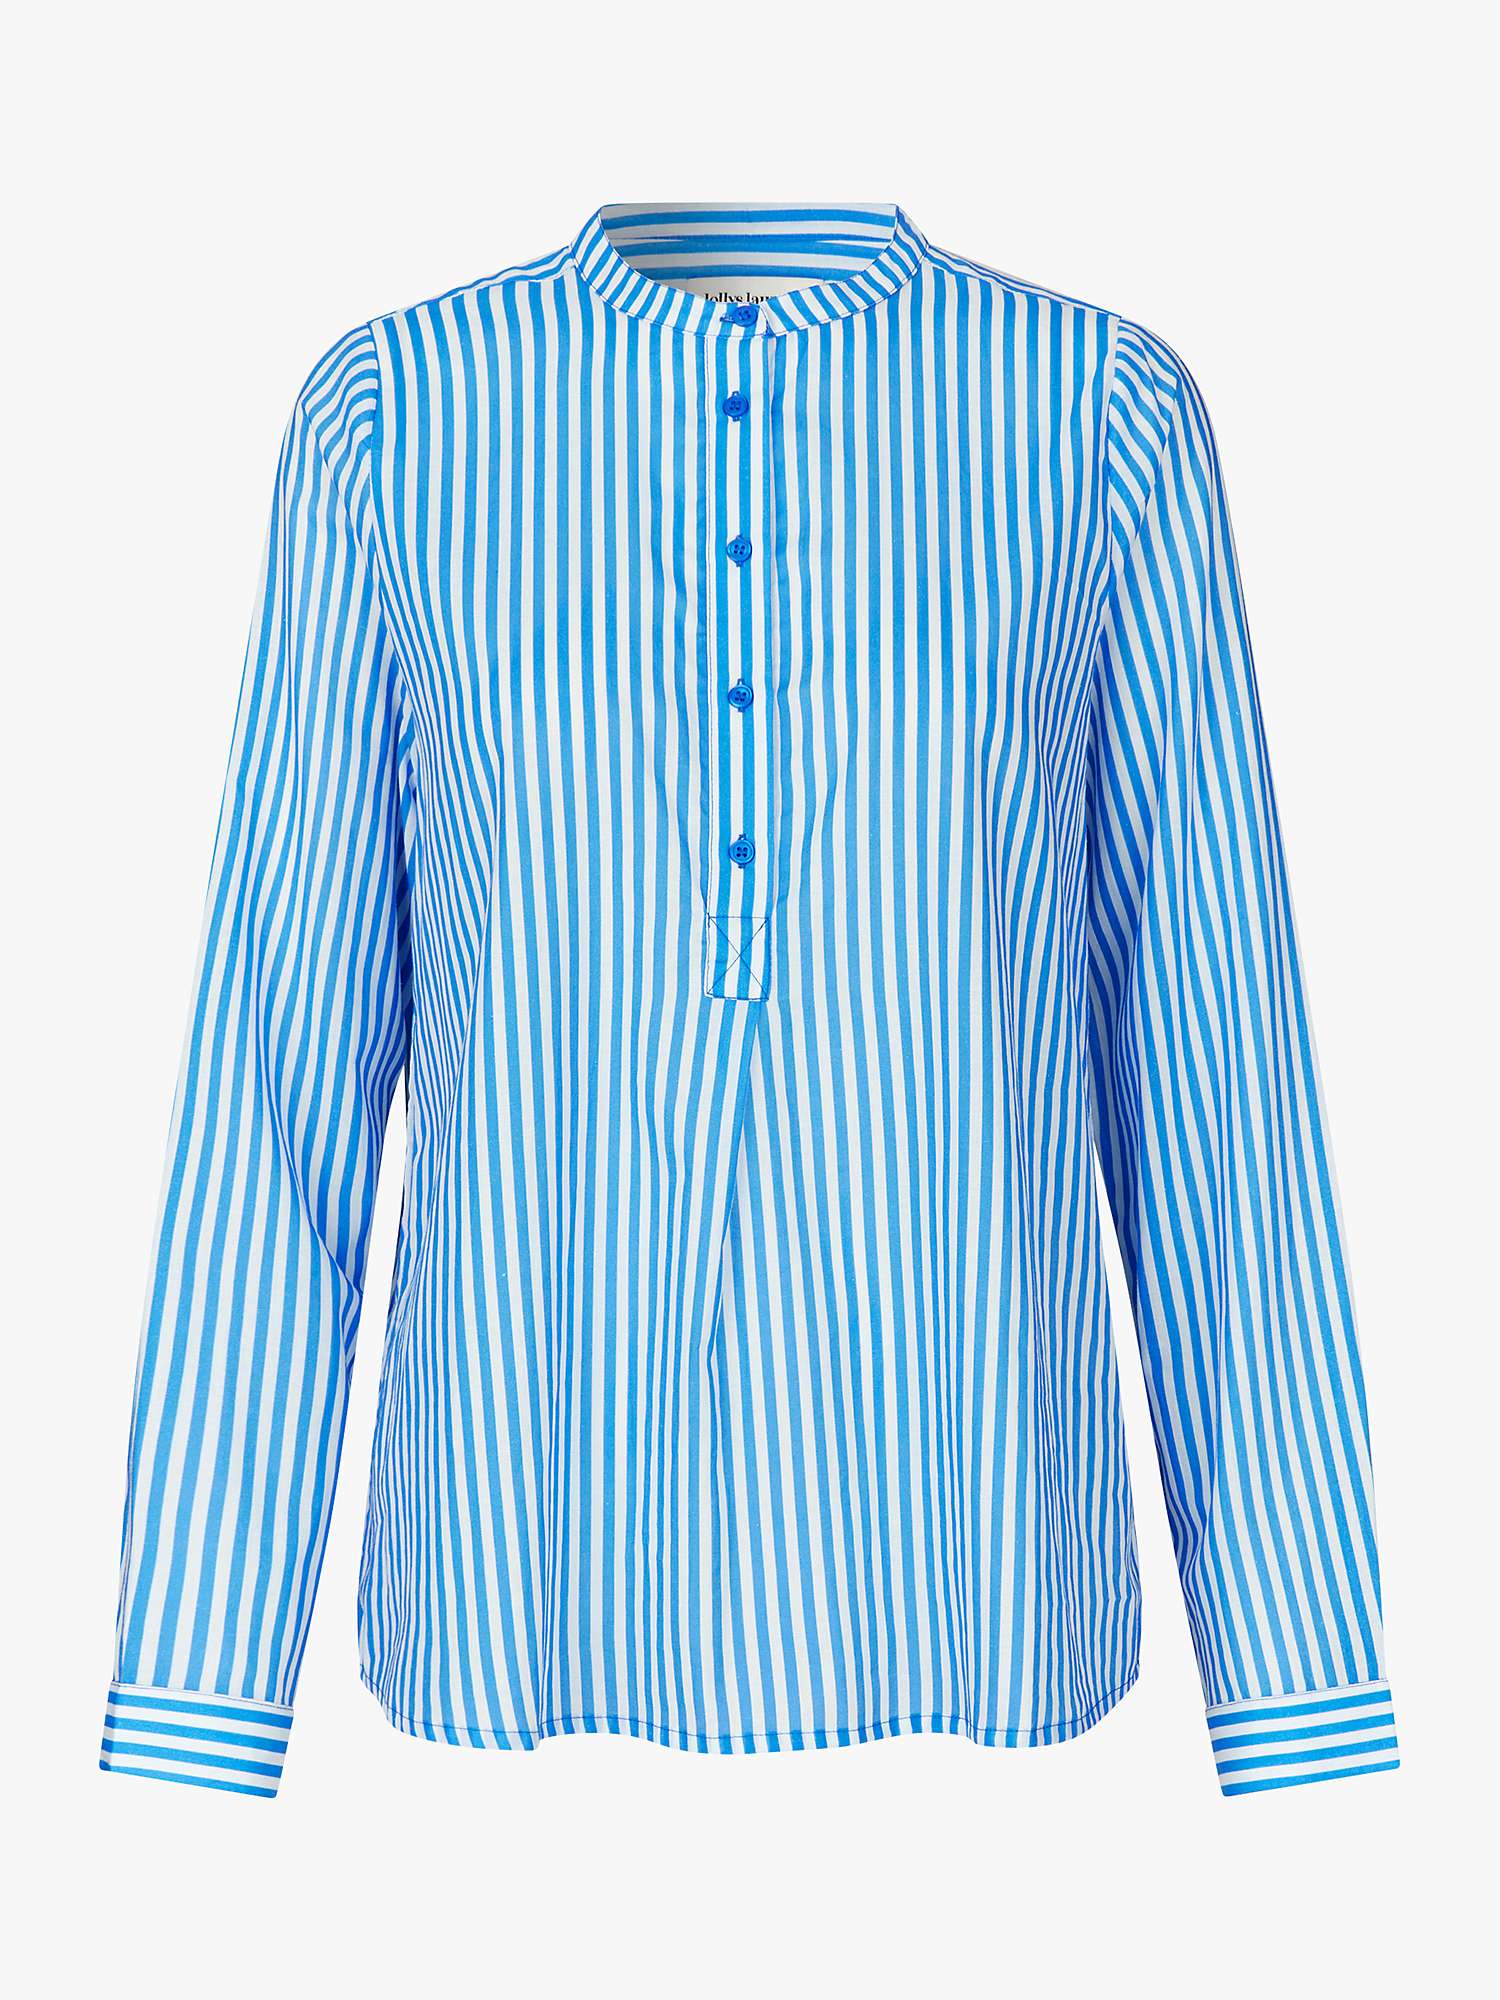 Buy Lollys Laundry Lux Organic Cotton Striped Shirt, Blue/White Online at johnlewis.com